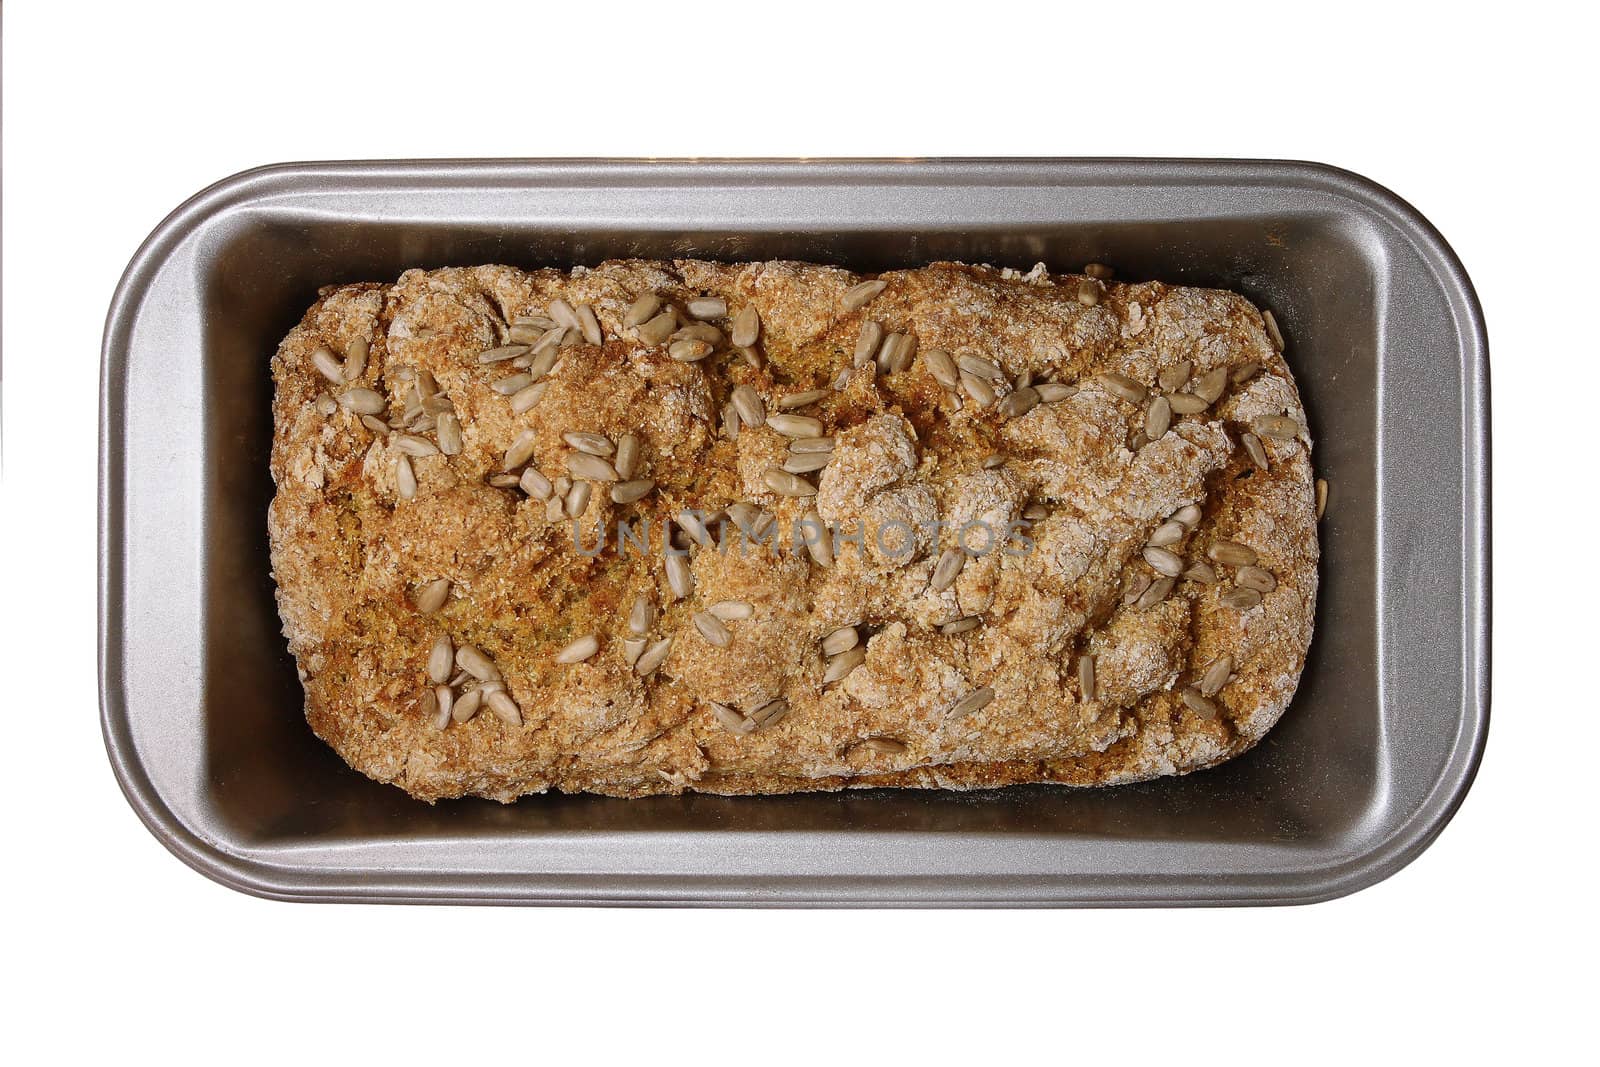 homemade quick bread with sunflower seeds by cococinema